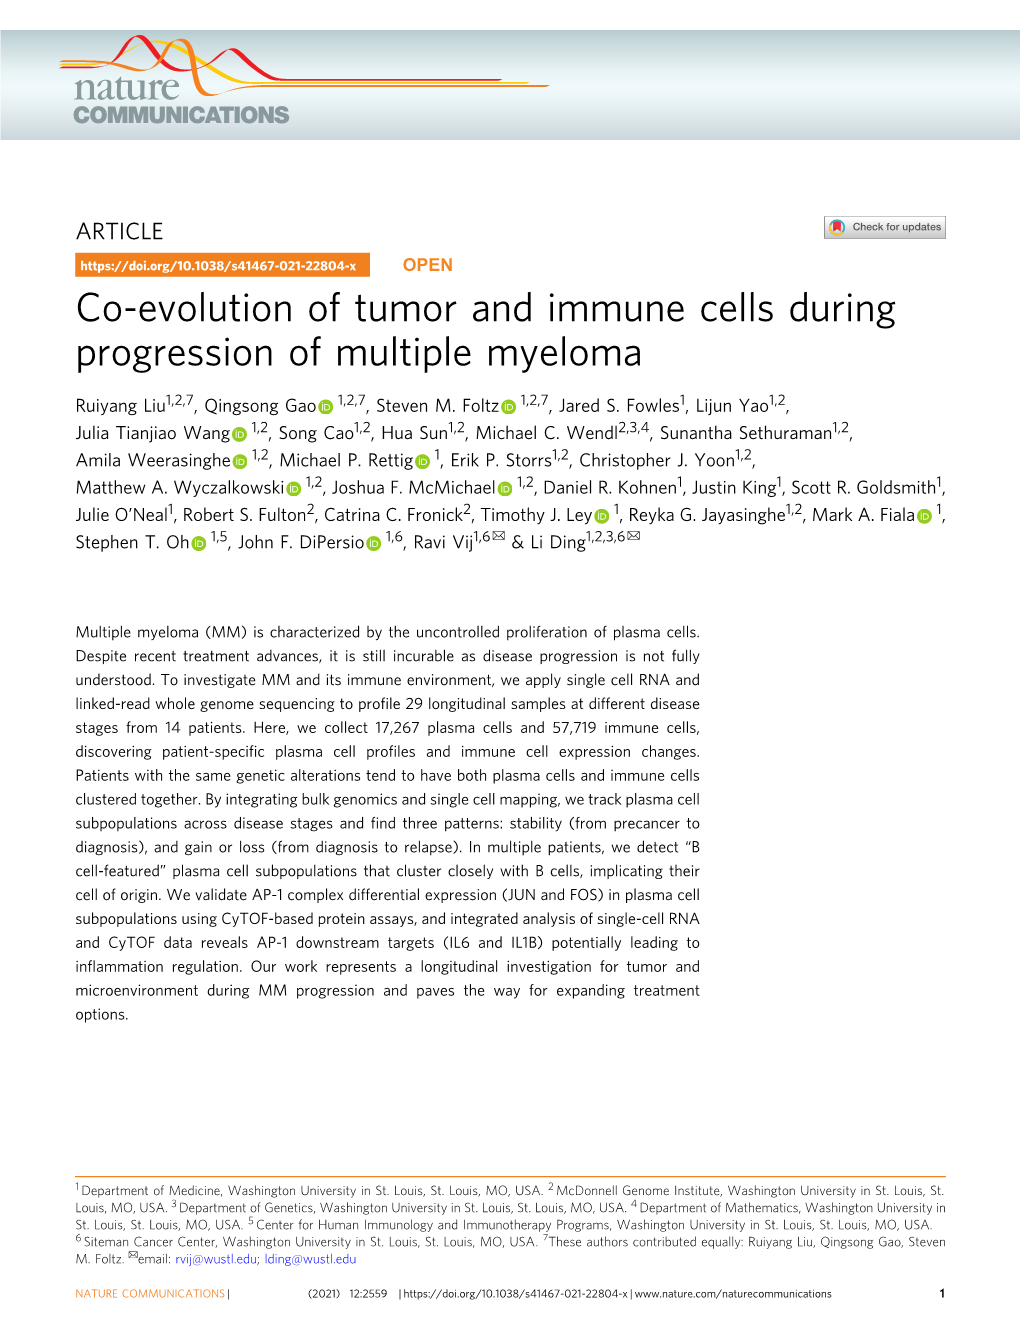 Co-Evolution of Tumor and Immune Cells During Progression of Multiple Myeloma